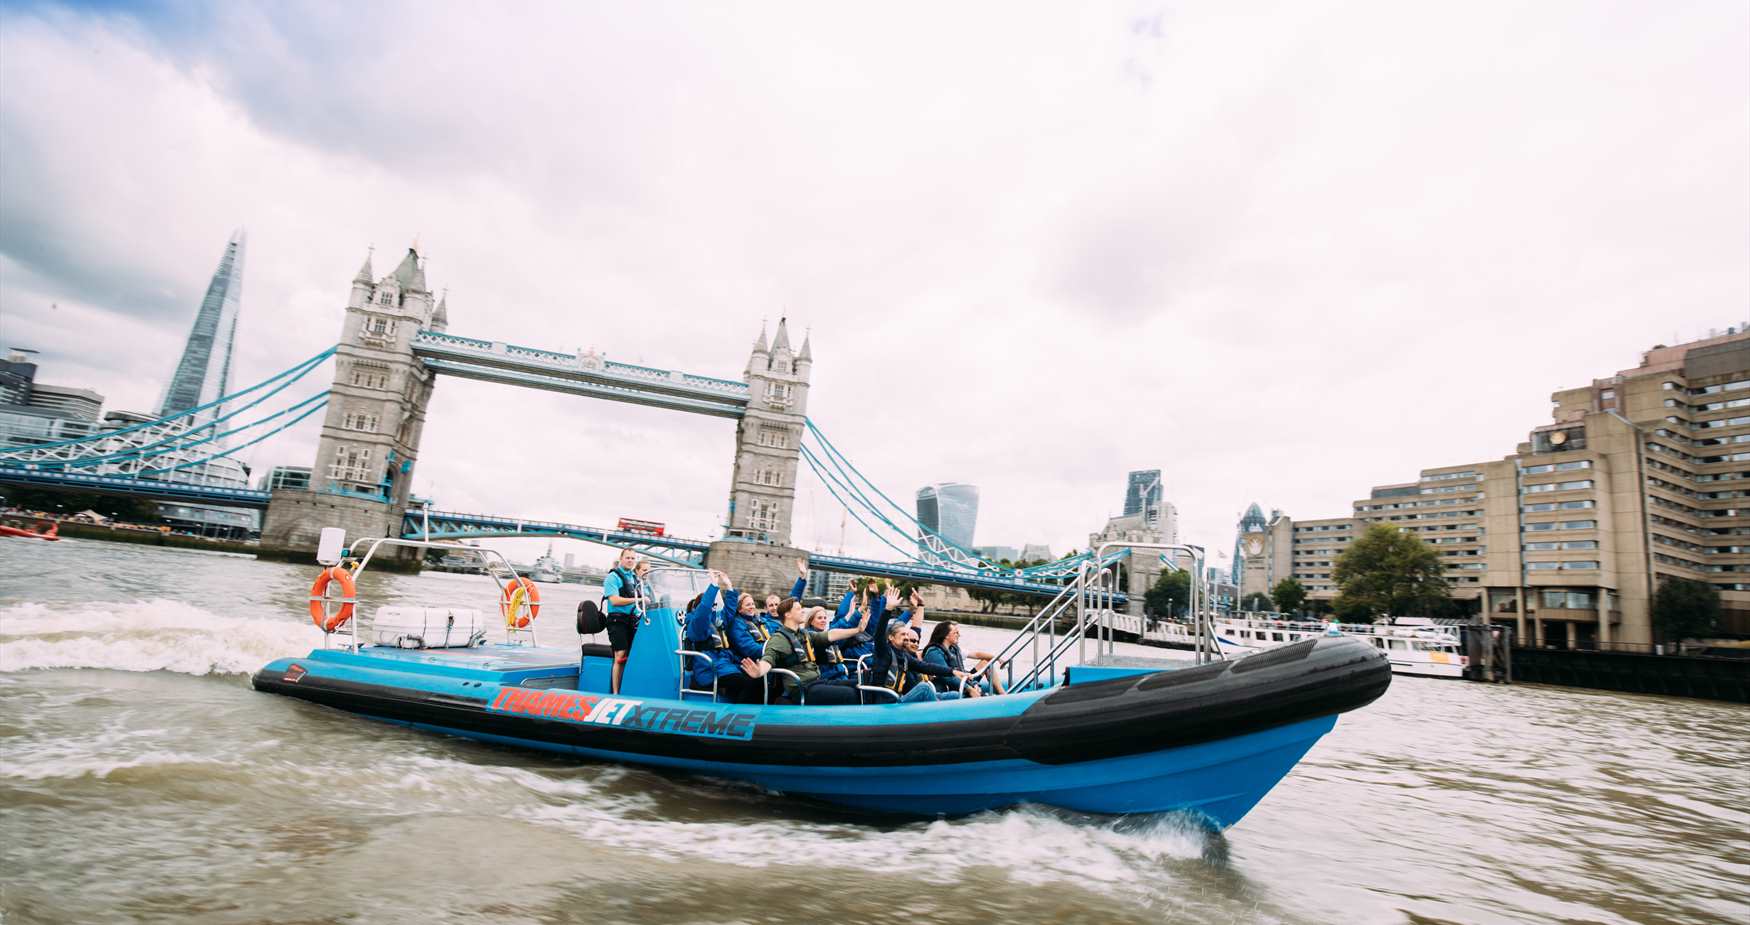 Speedboat experience on the River Thames, London with ThamesJet